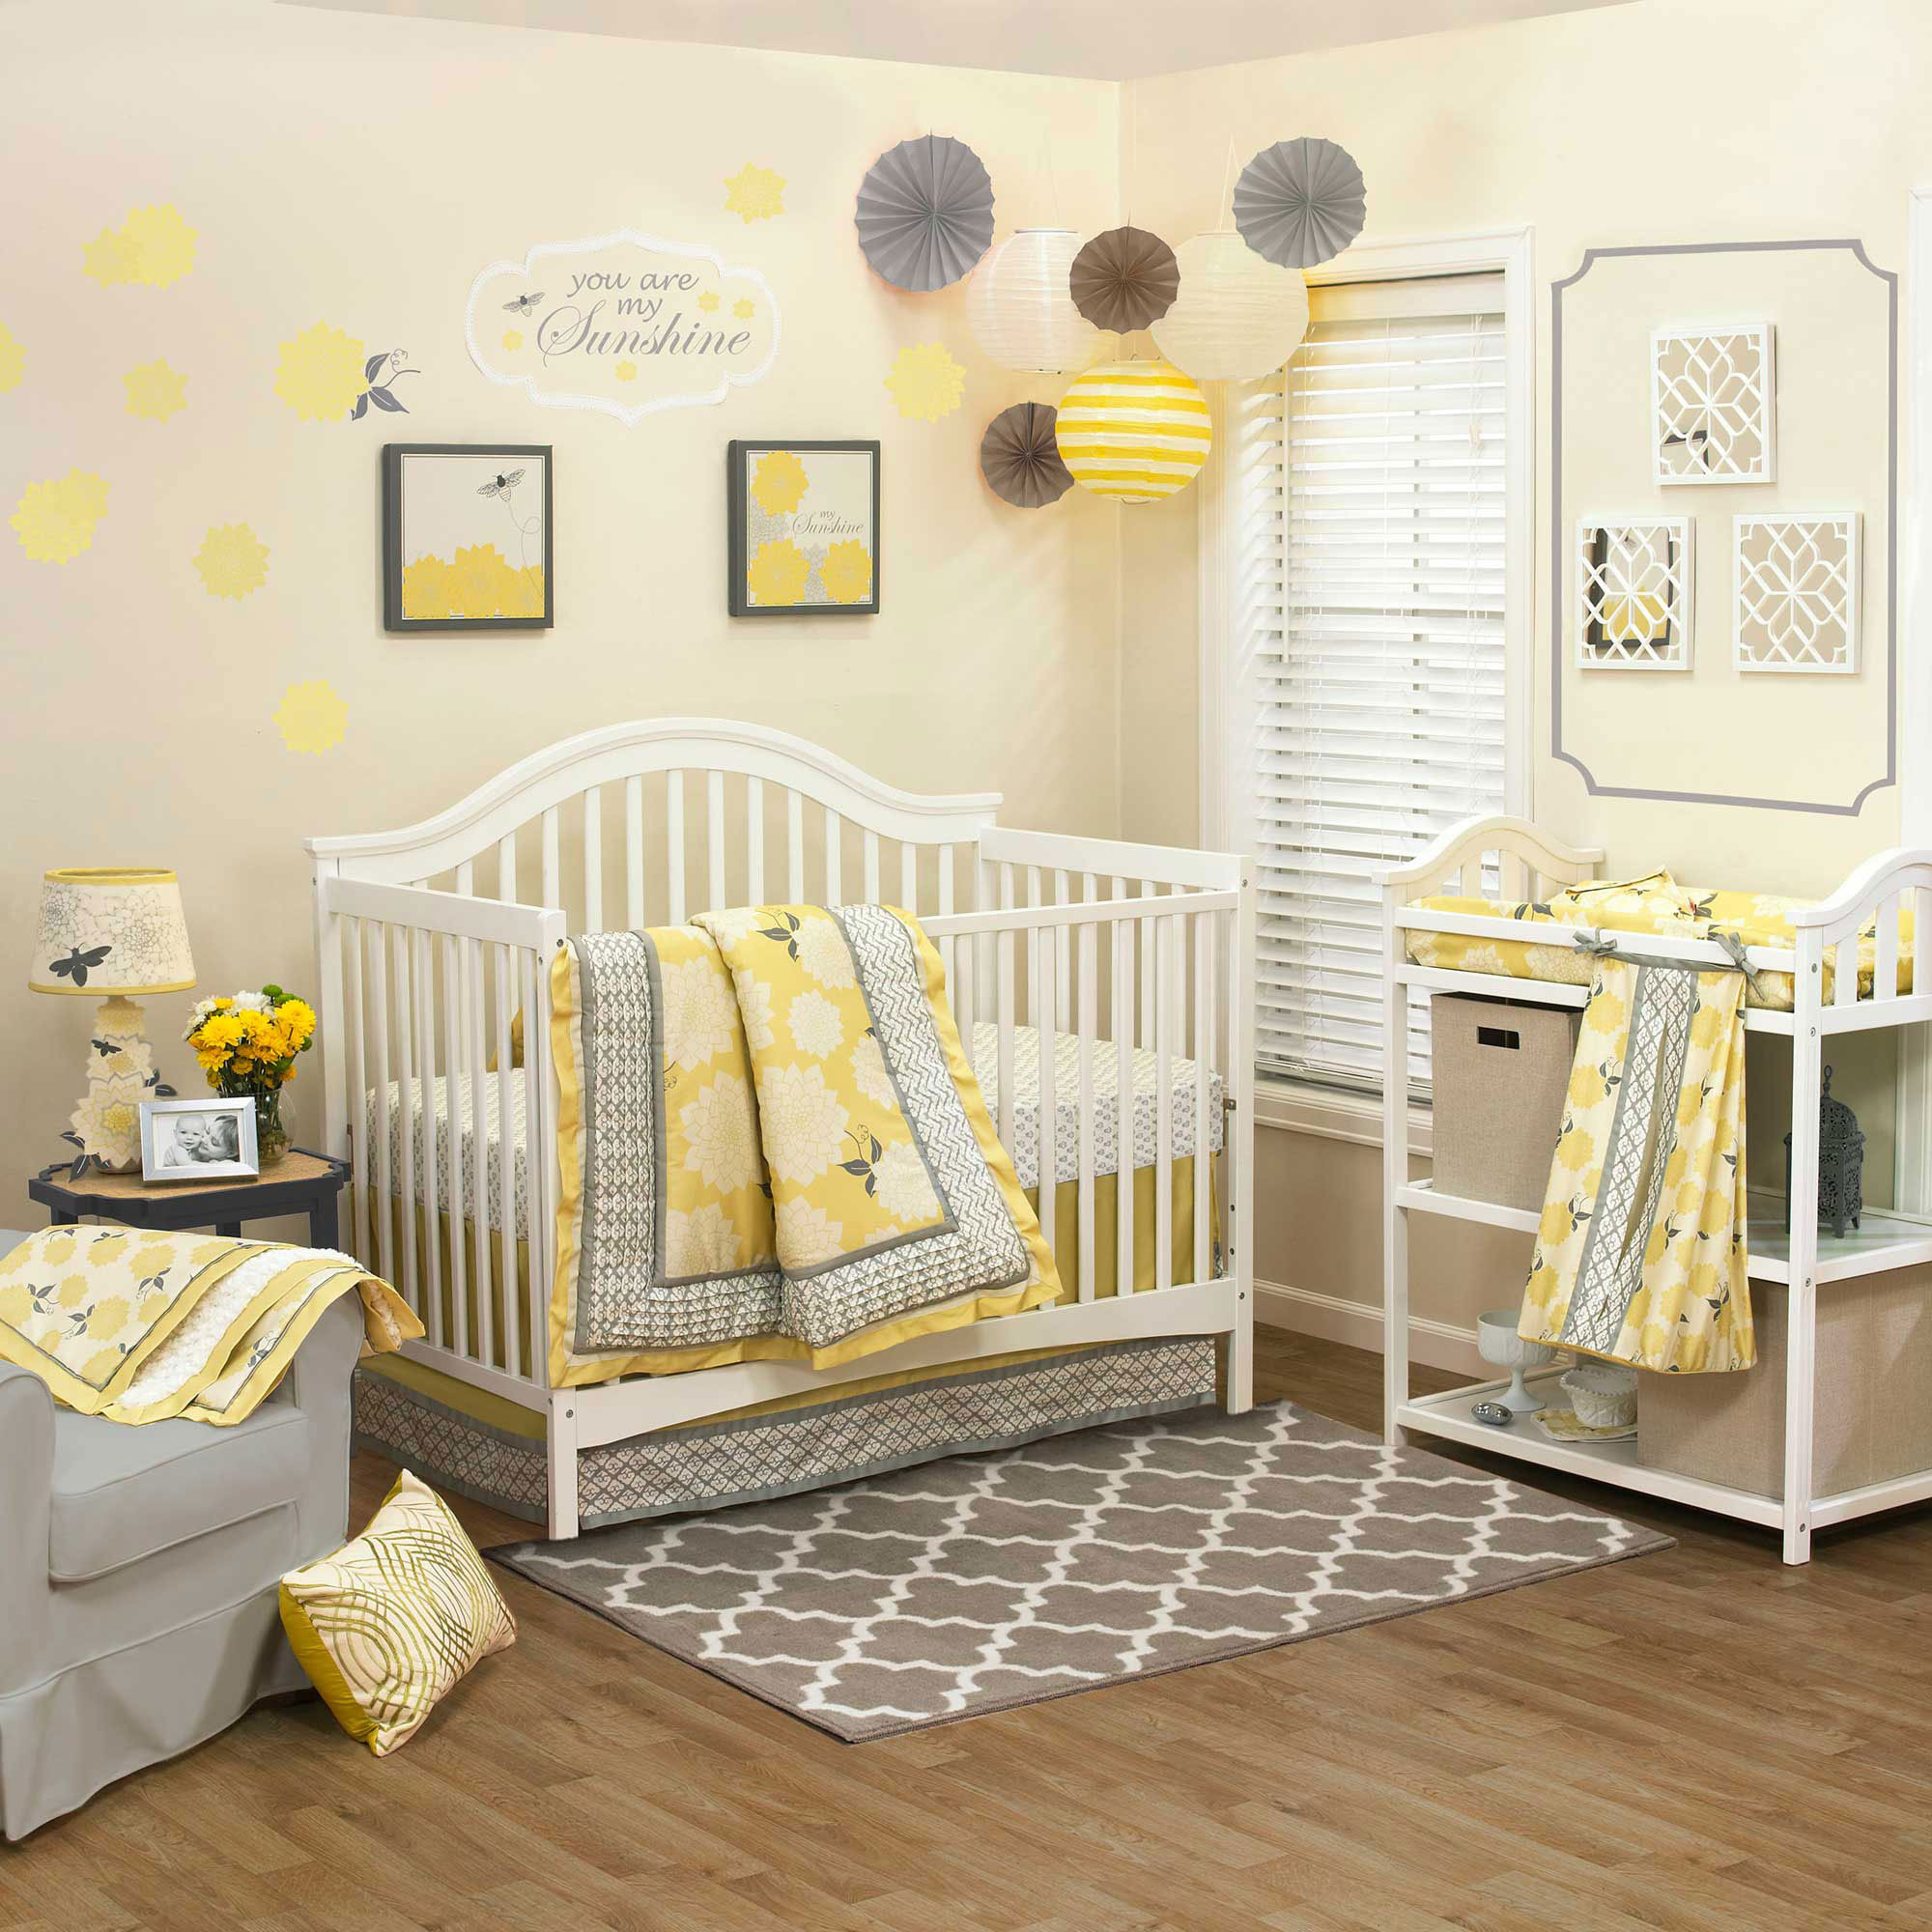 Room Decor For Baby
 Baby Girl Nursery Ideas 10 Pretty Examples Decorating Room